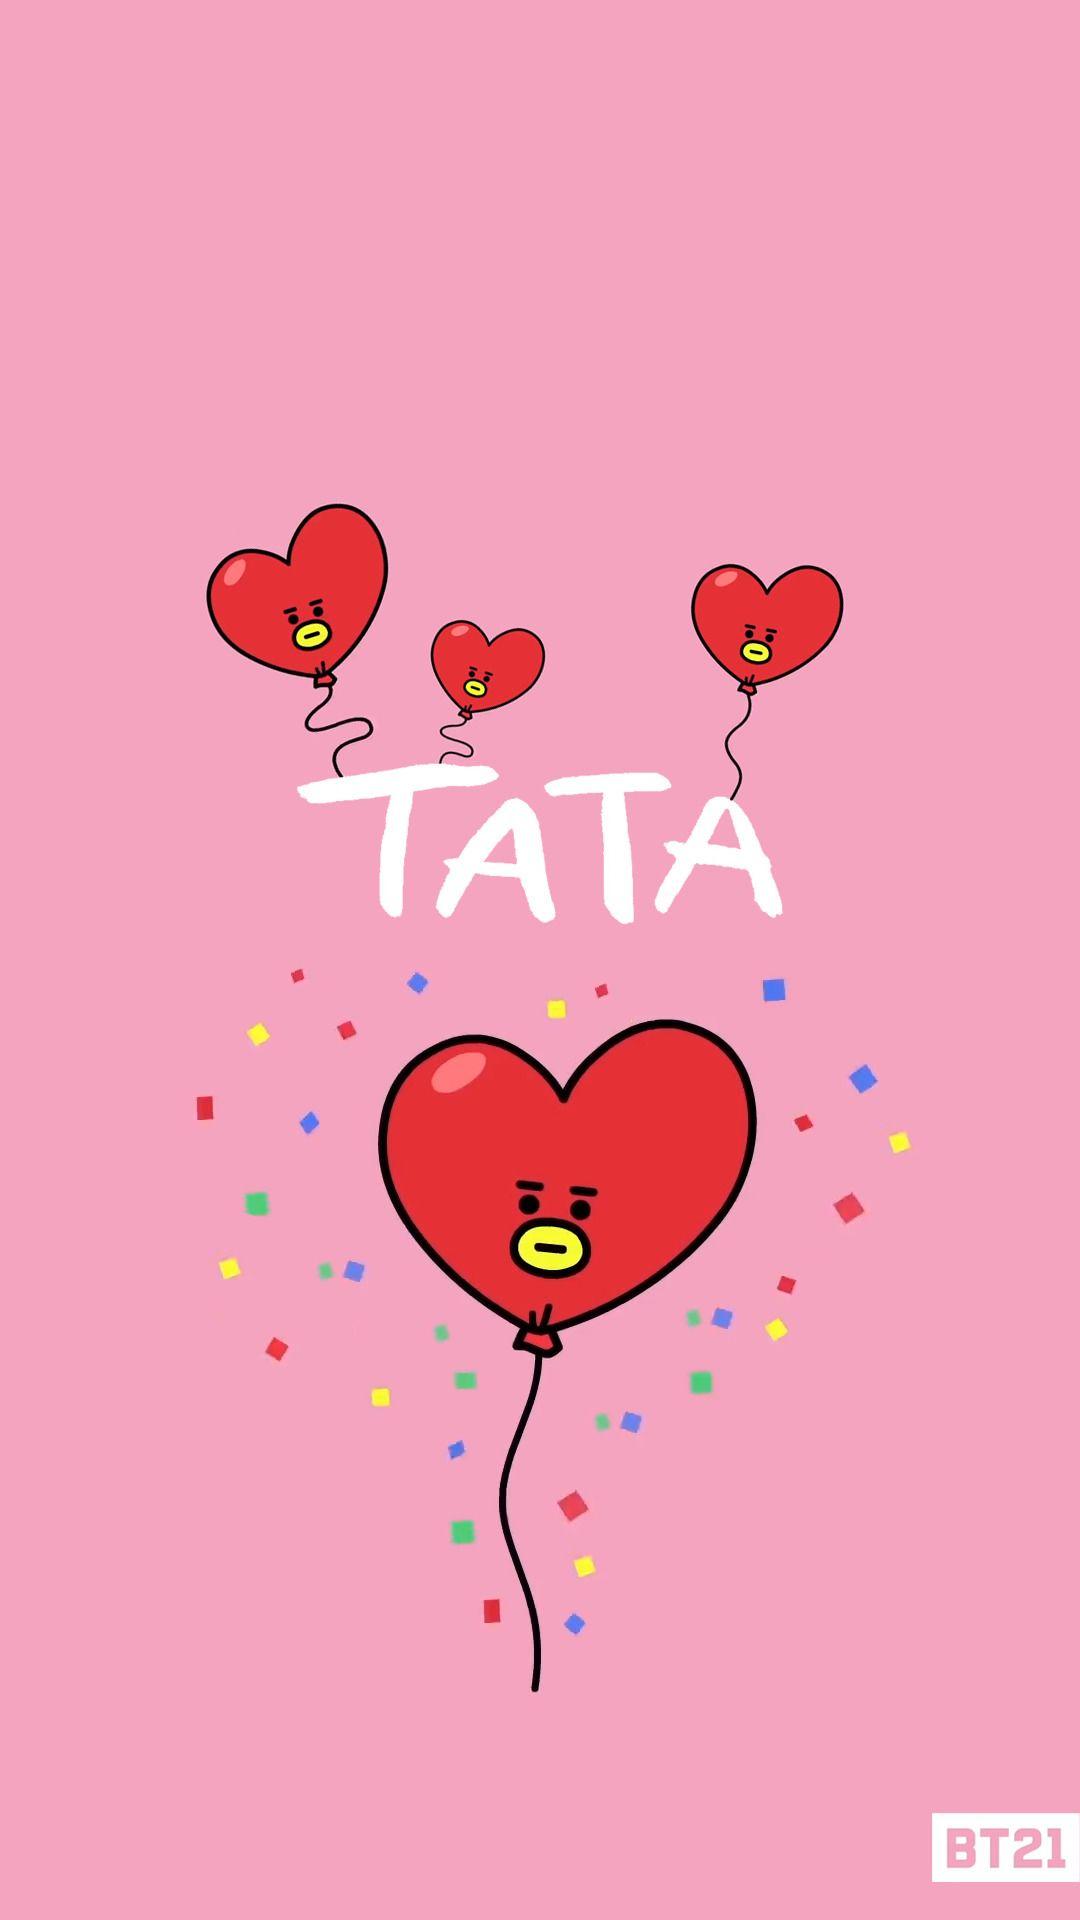 Tata Bt21 Wallpapers Top Free Tata Bt21 Backgrounds